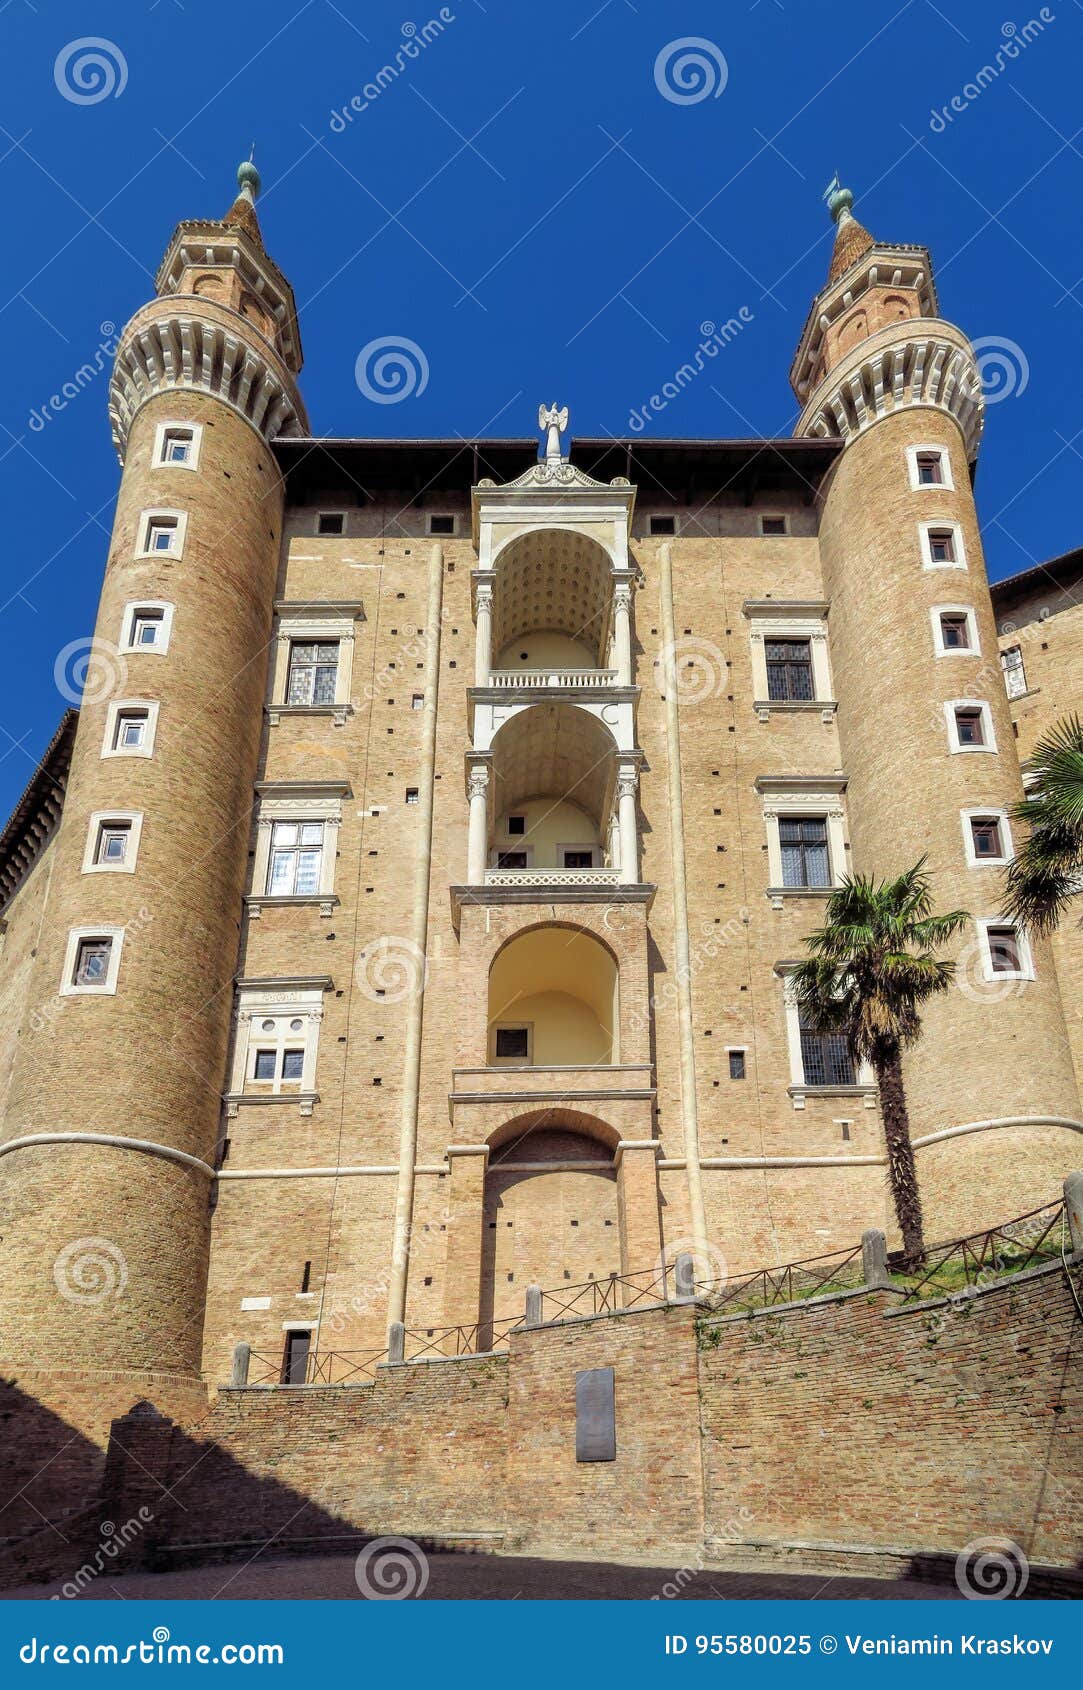 Urbino - Ducale Palace. Ducale Palace in Urbino city, Marche, Italy